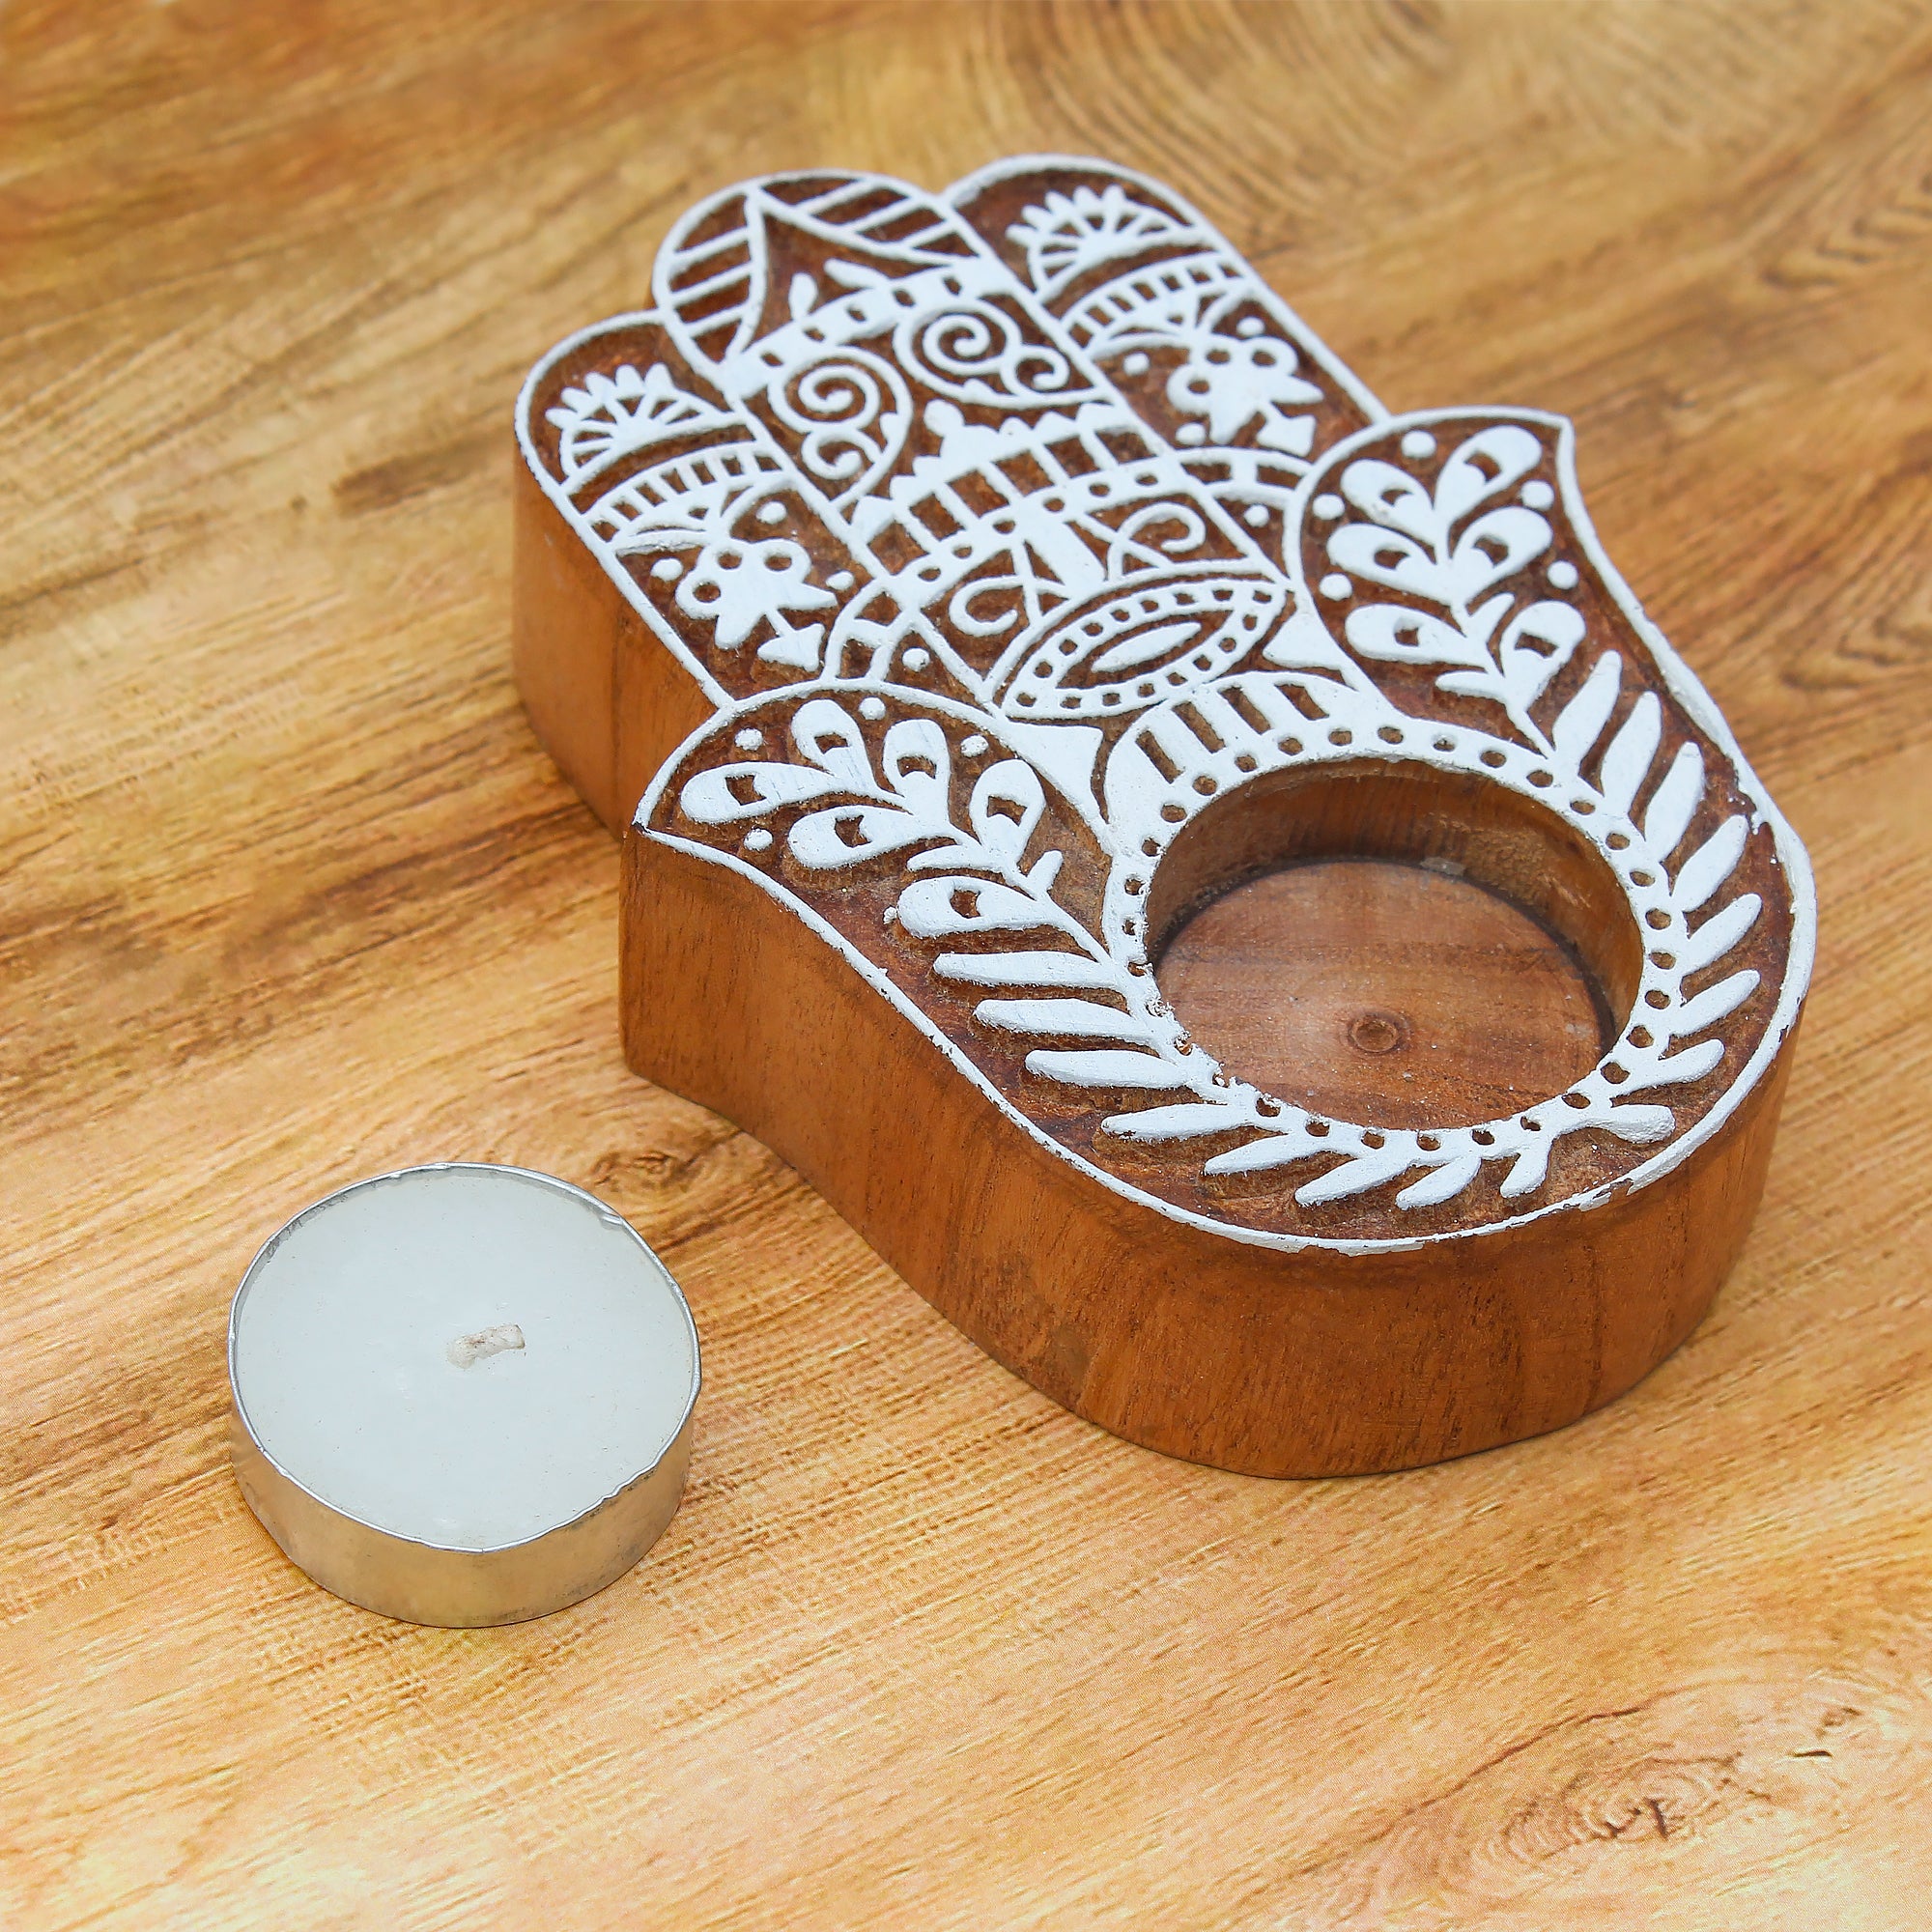 Wooden Printing Block & Candle Holder- Ornate Hand